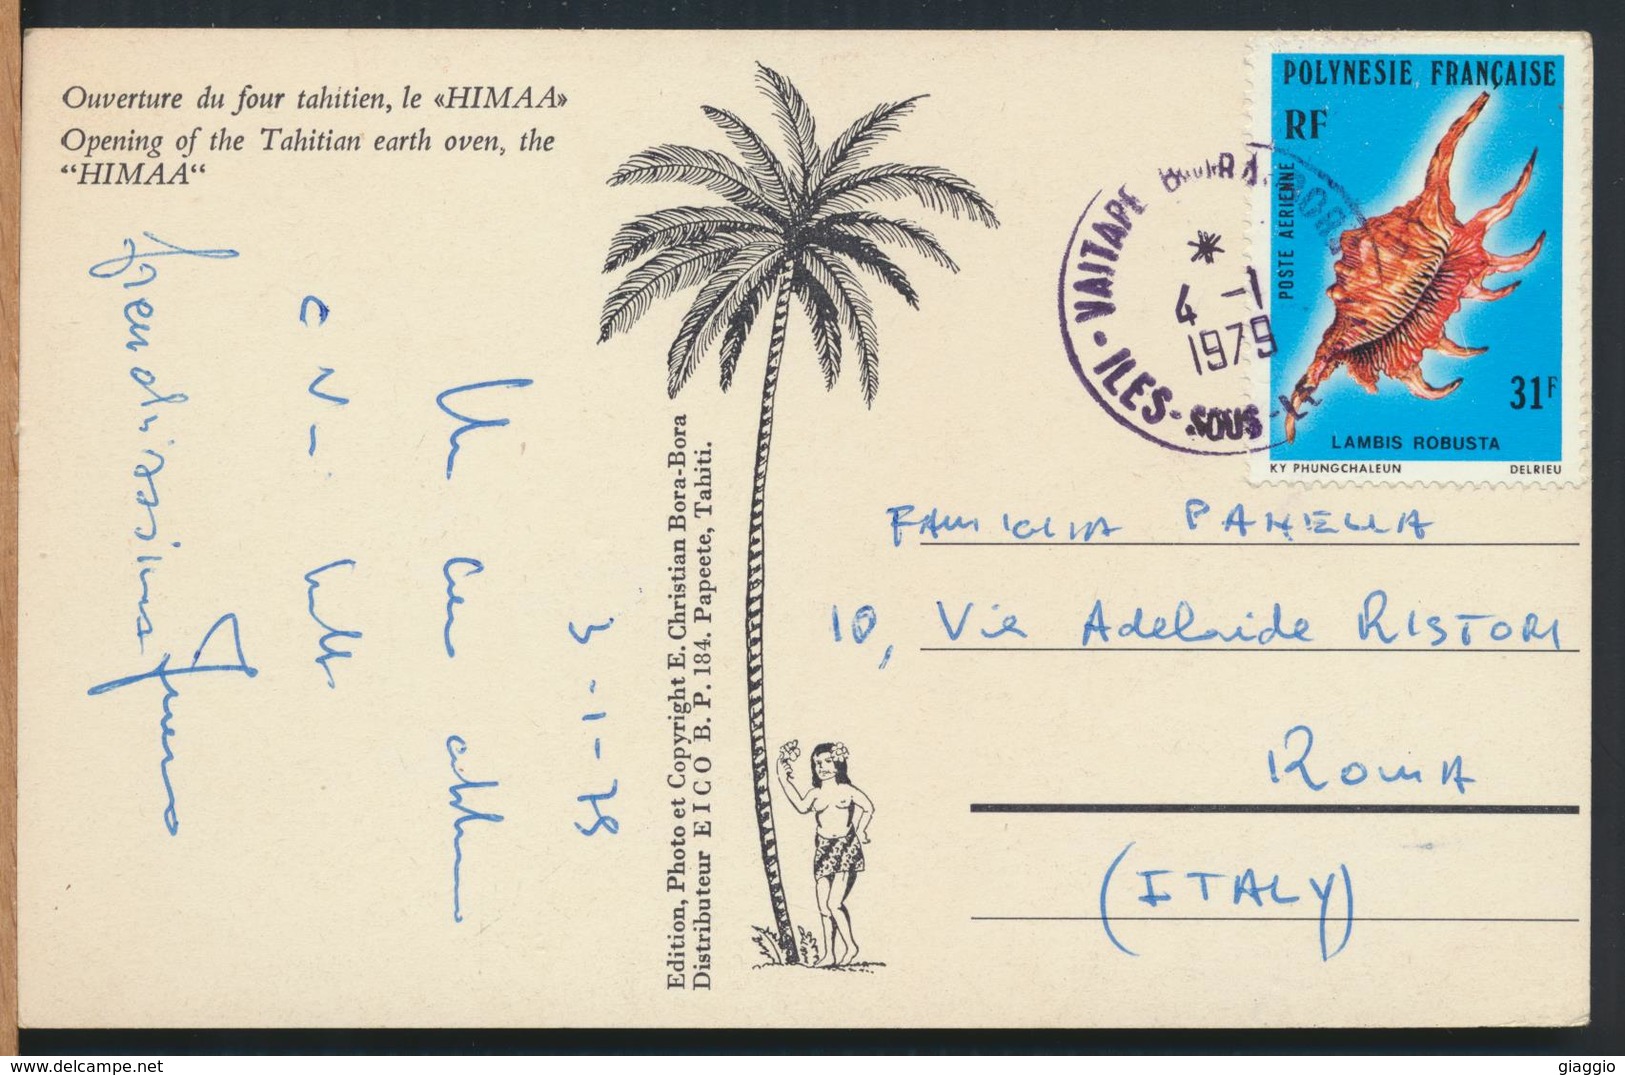 °°° 13076 - POLYNESIE FRANCAISE - HIMAA - 1979 With Stamps °°° - Polinesia Francese